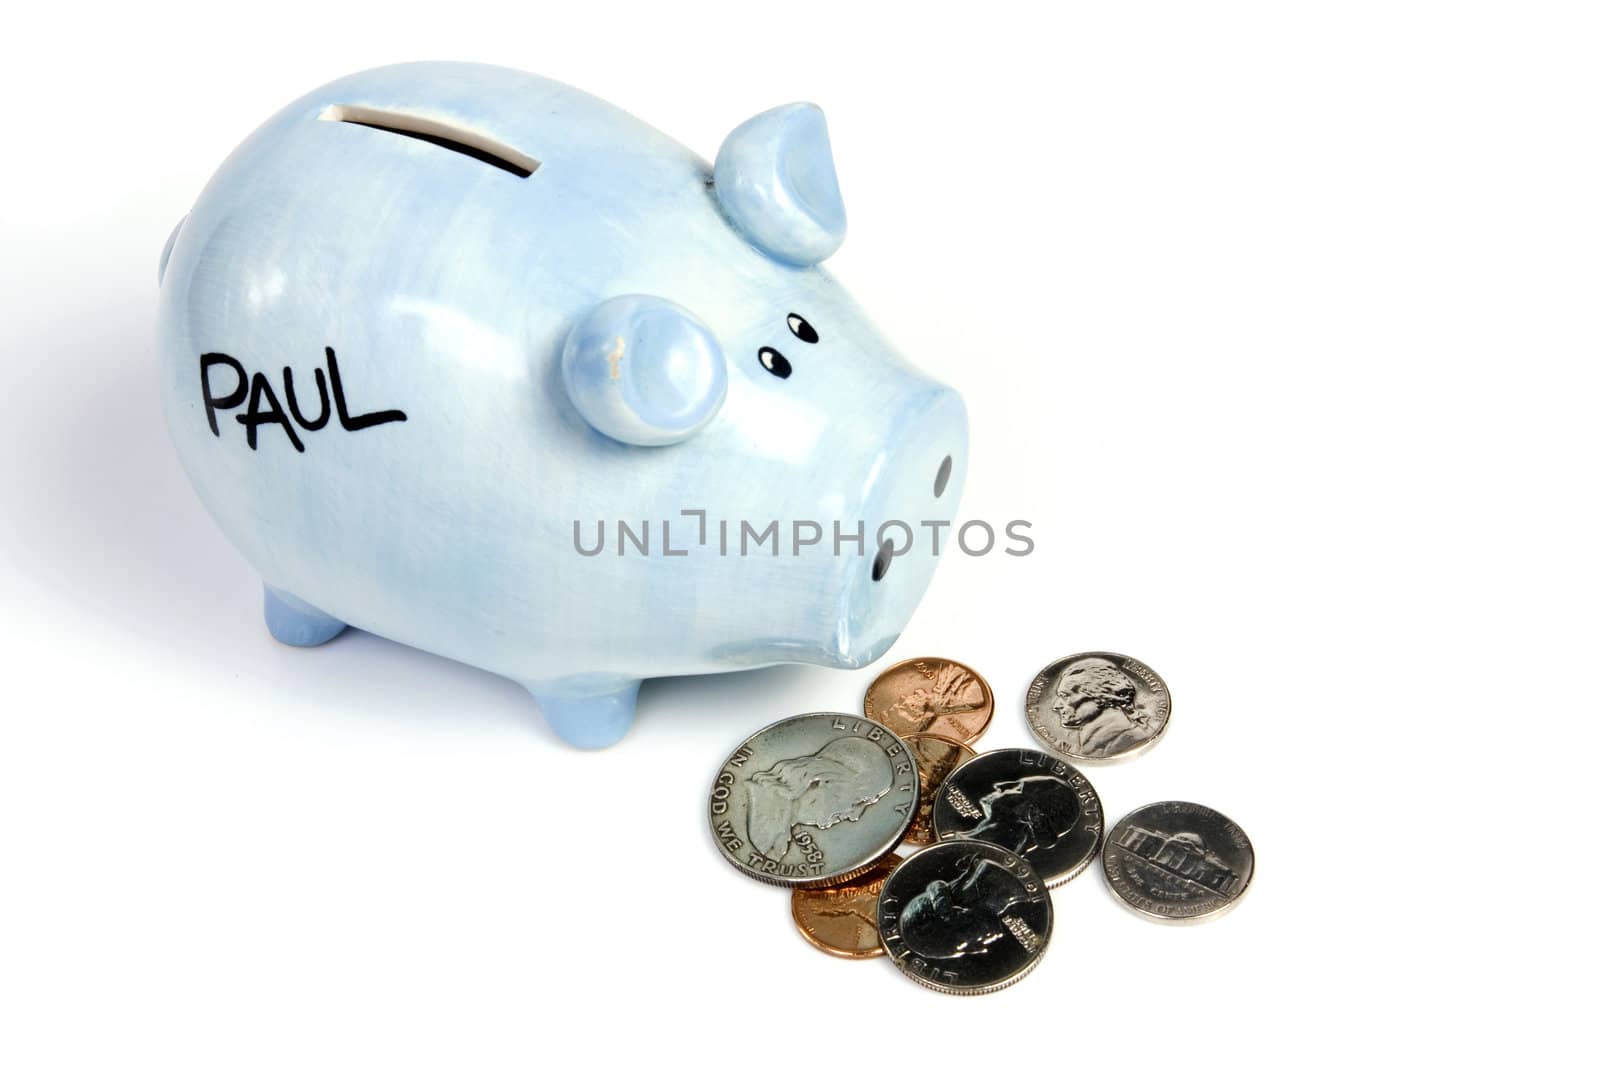 Blue piggy bank savings and coins on white isolated